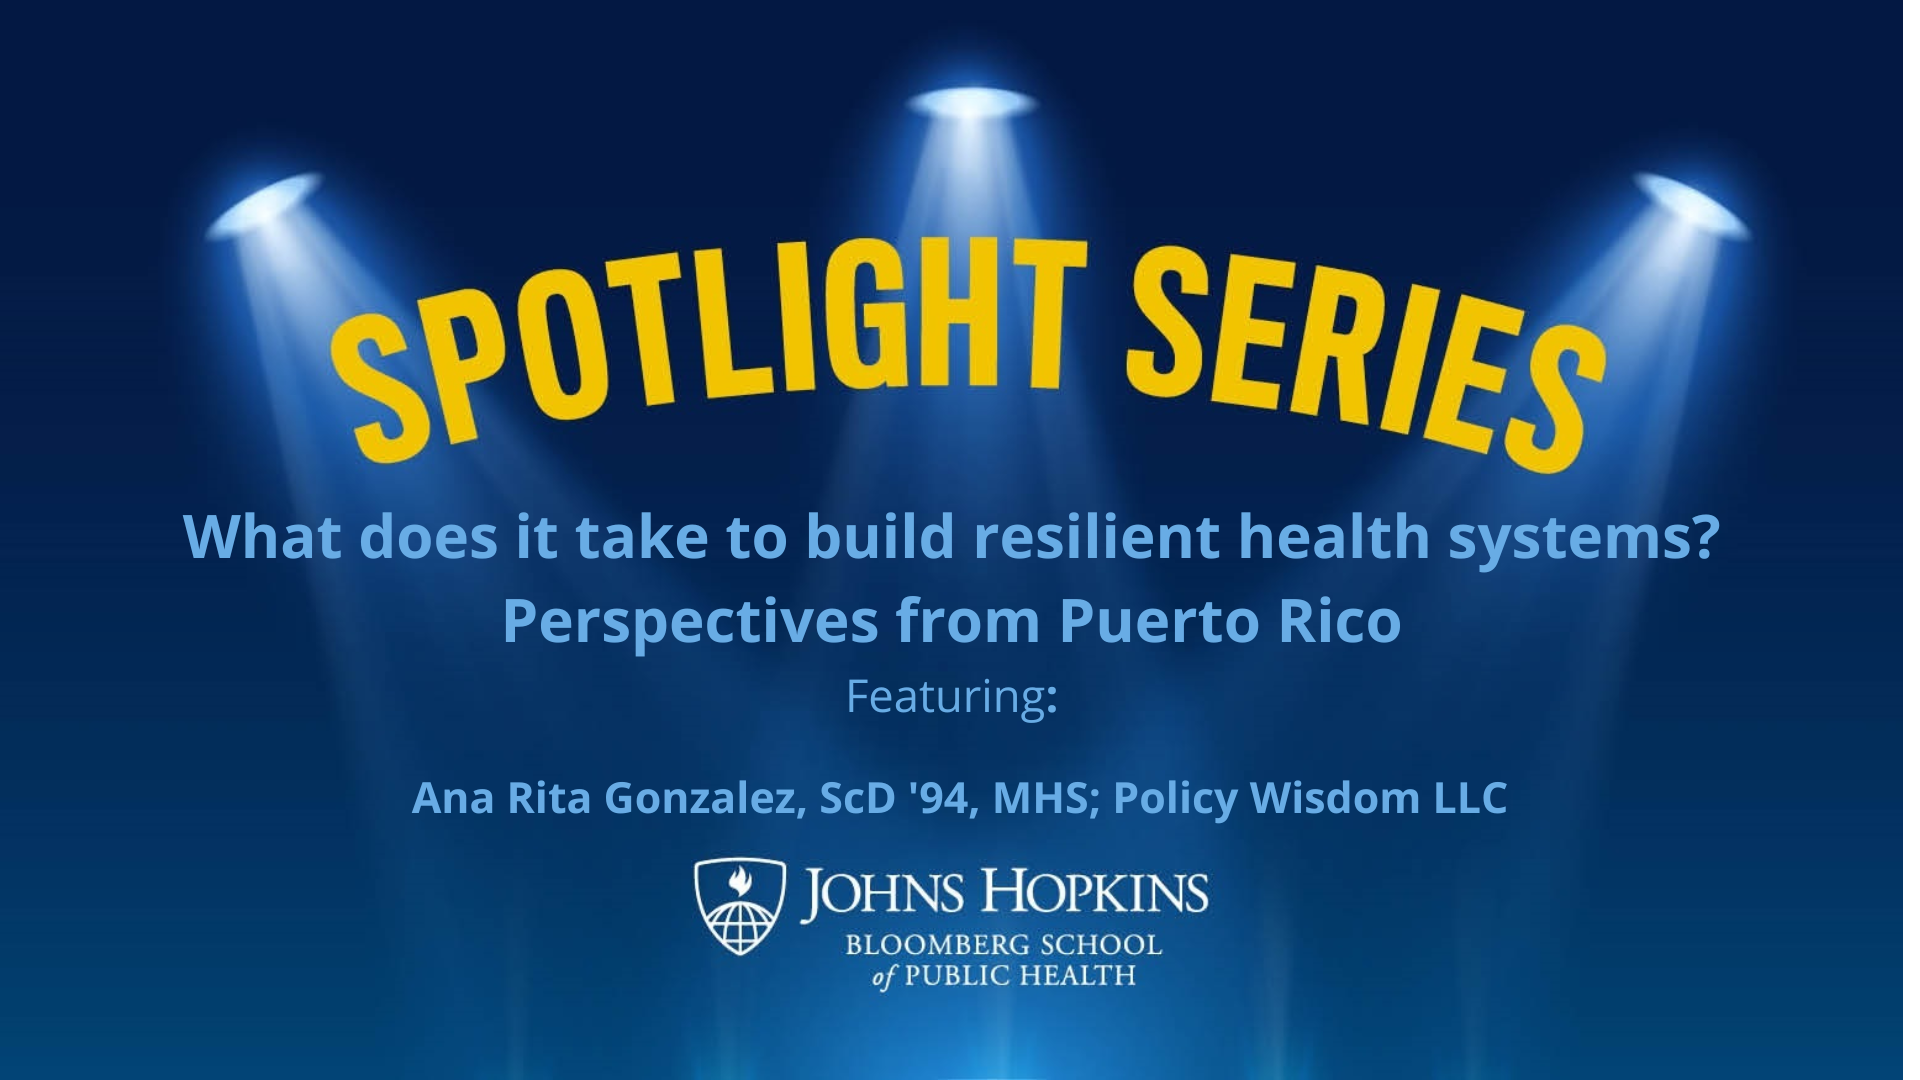 What does it take to build resilient health systems? Perspectives from Puerto Rico